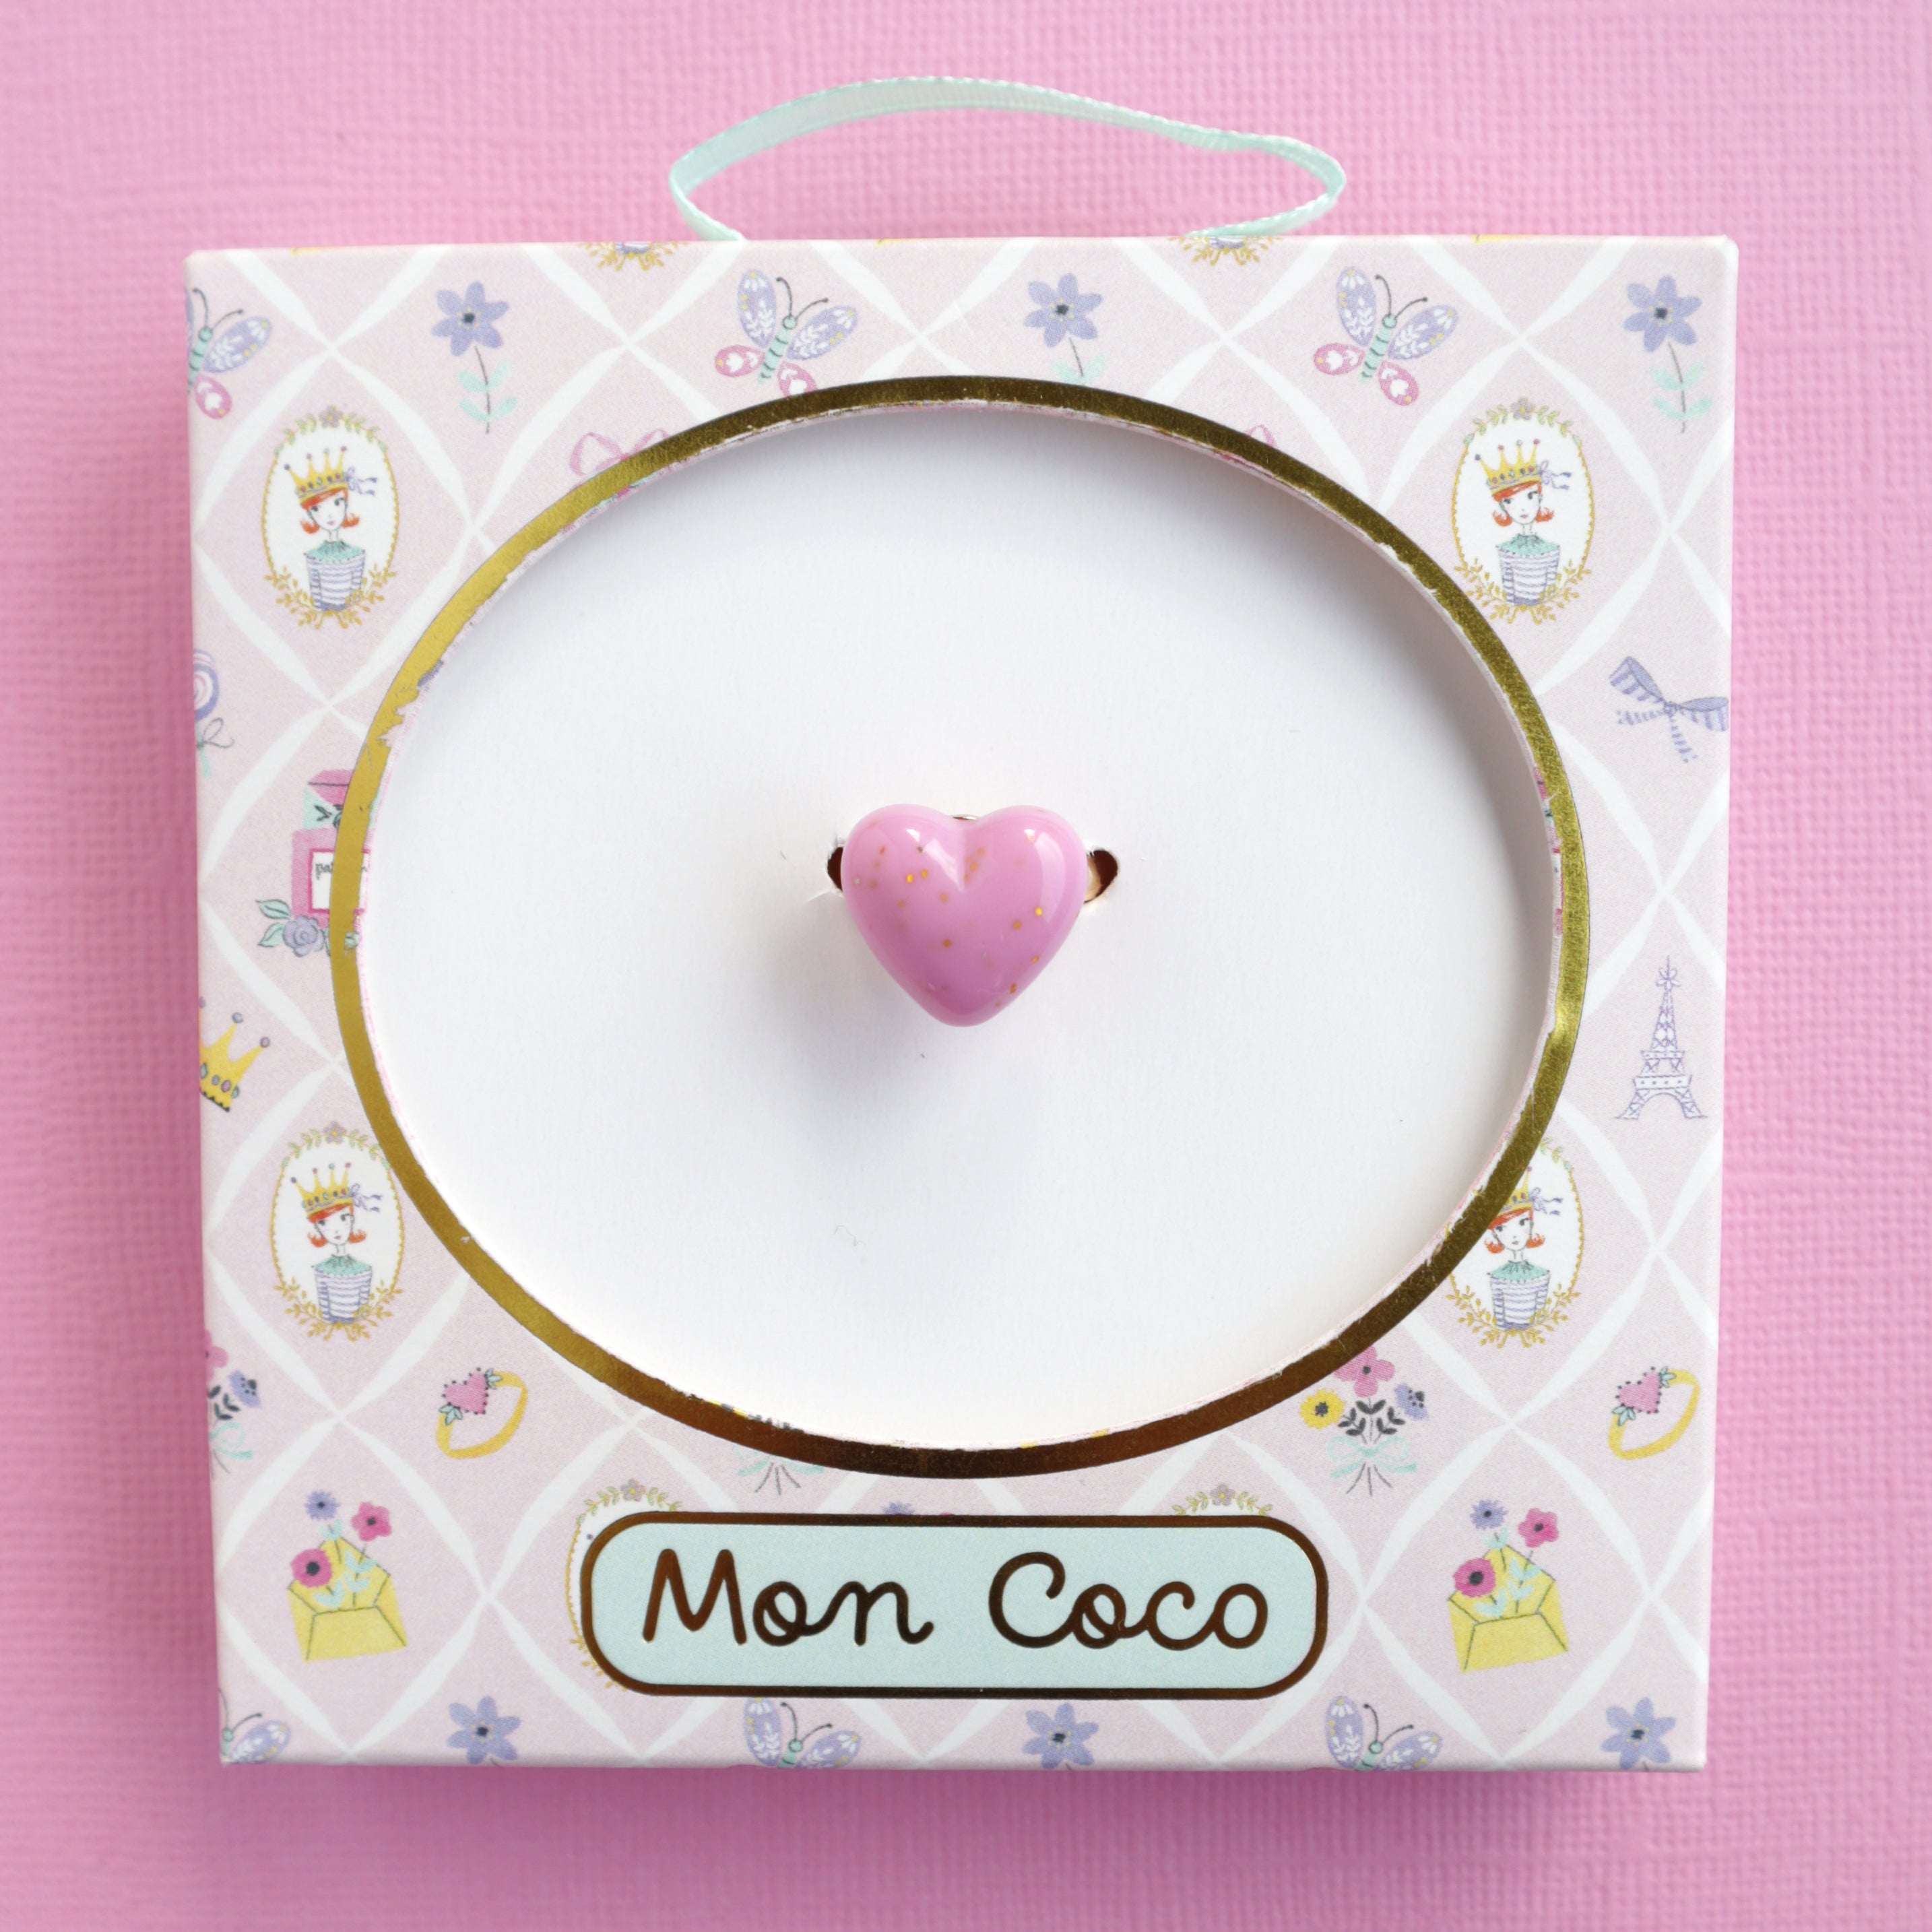 Mon Coco | Adjustable Ring - Sweet Heart